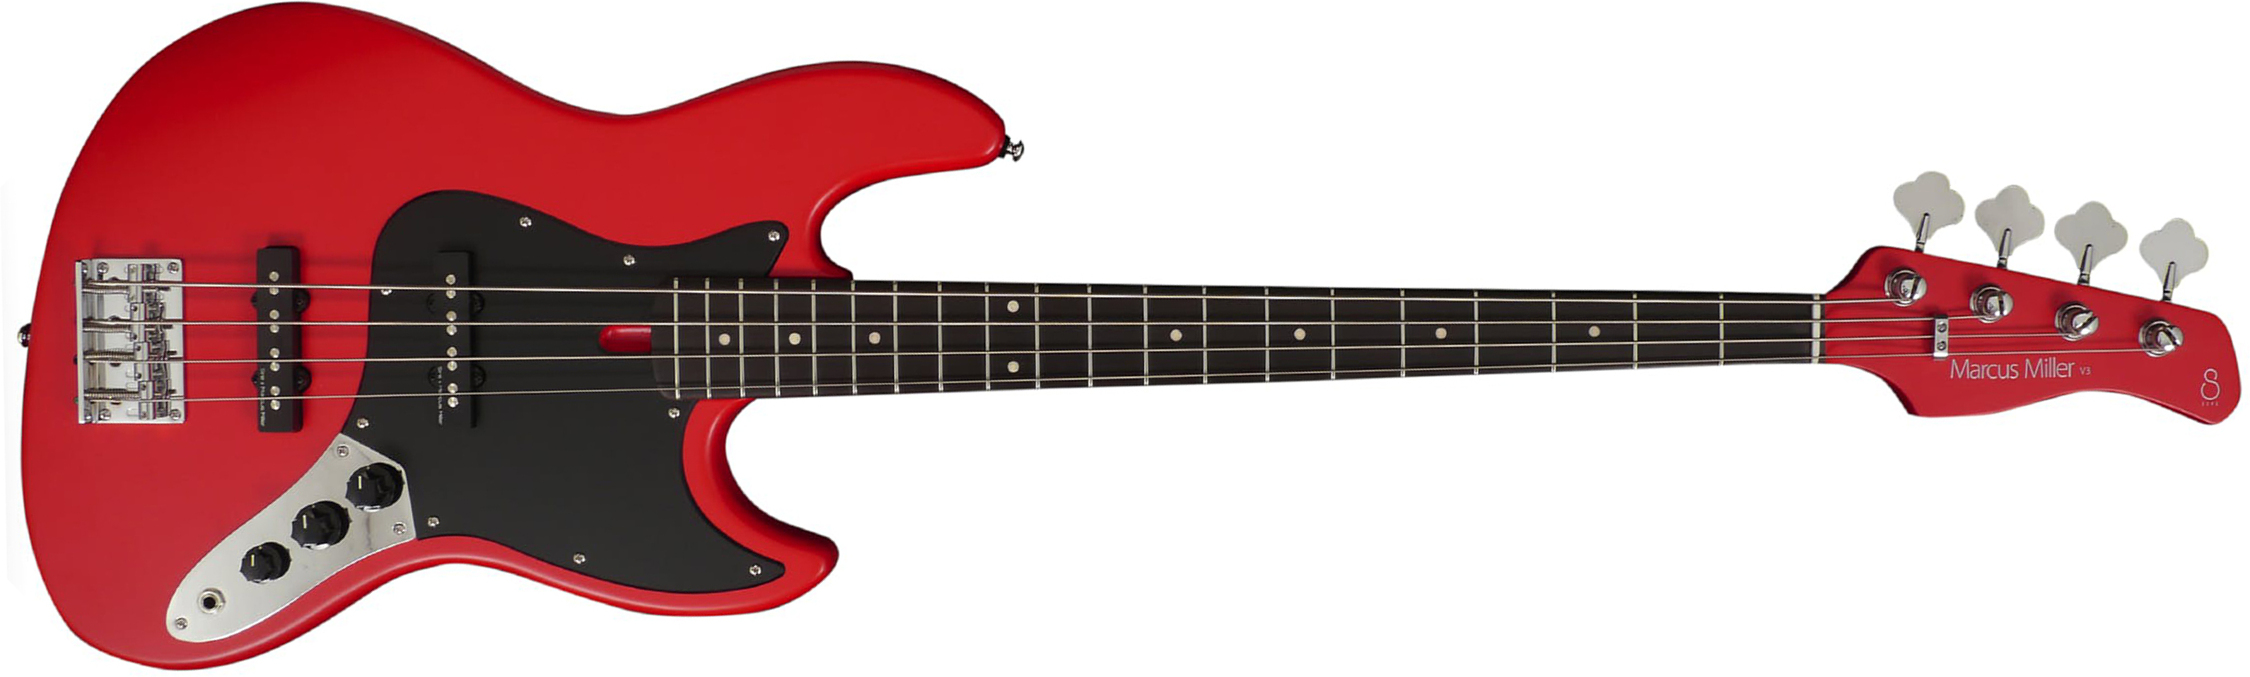 Marcus Miller V3p 4st Rw - Red Satin - Solid body electric bass - Main picture